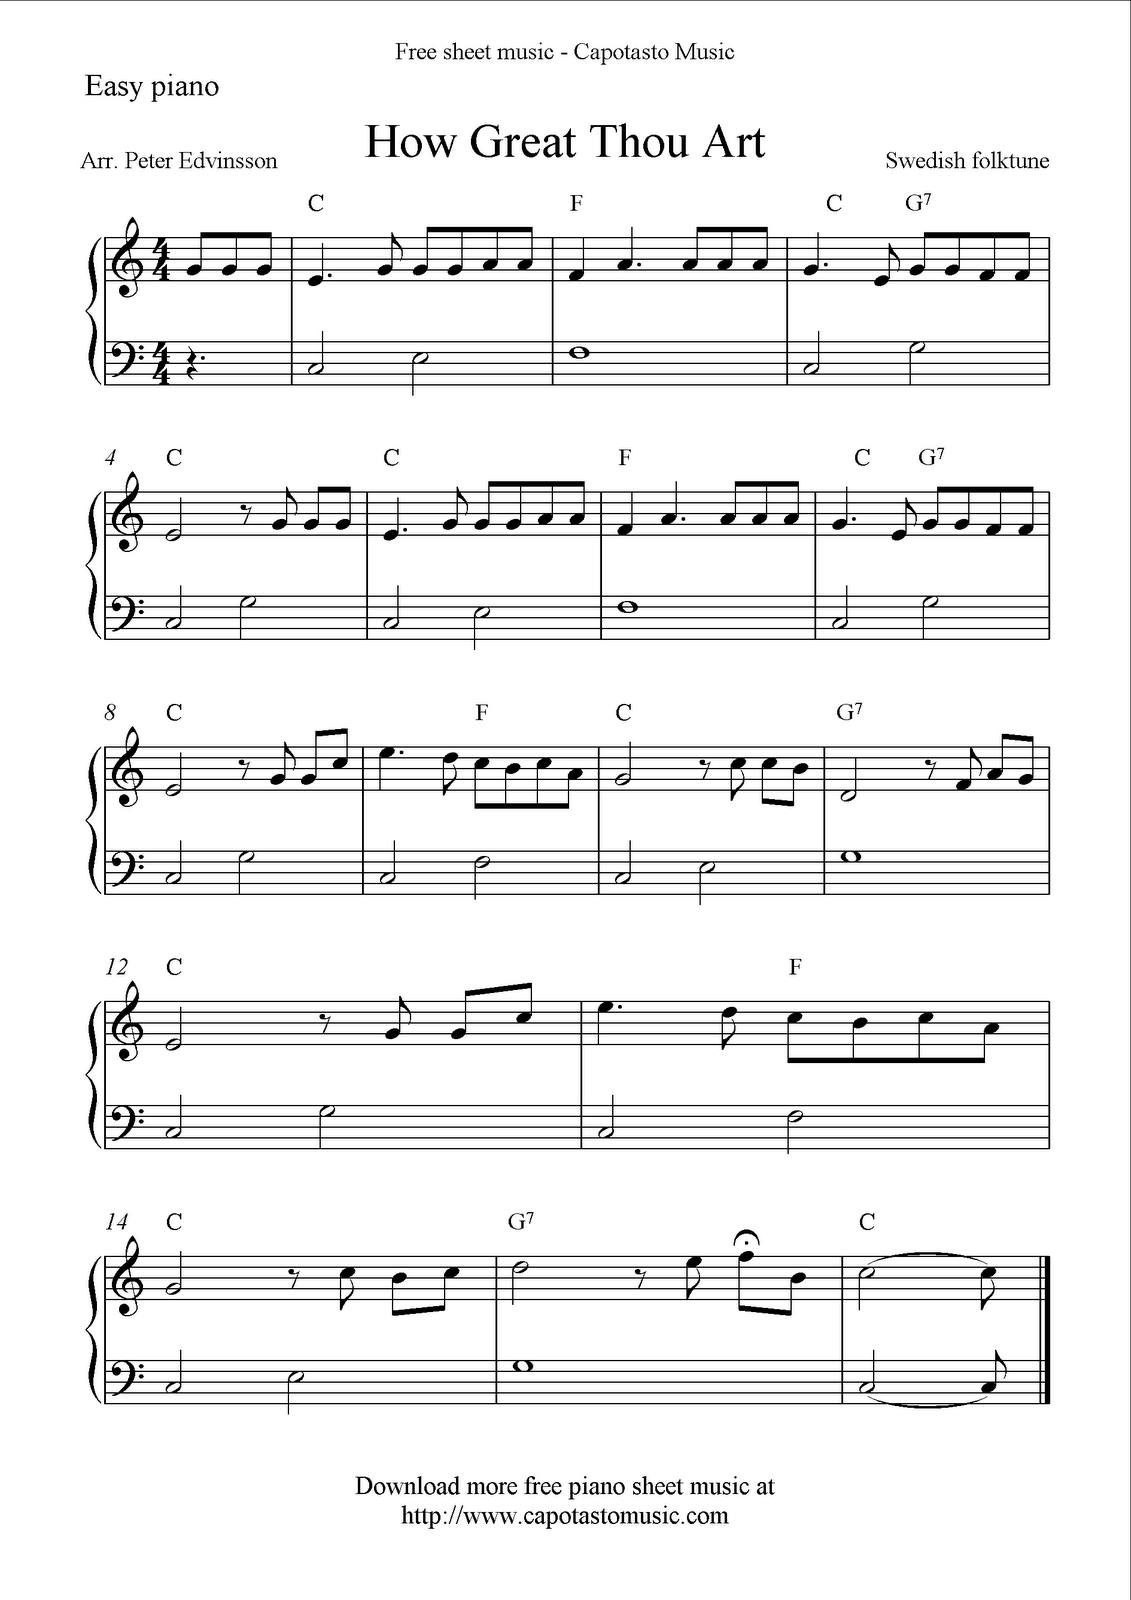 Free Sheet Music Pages &amp;amp; Guitar Lessons | Orchestra | Pinterest - Free Printable Classical Sheet Music For Piano